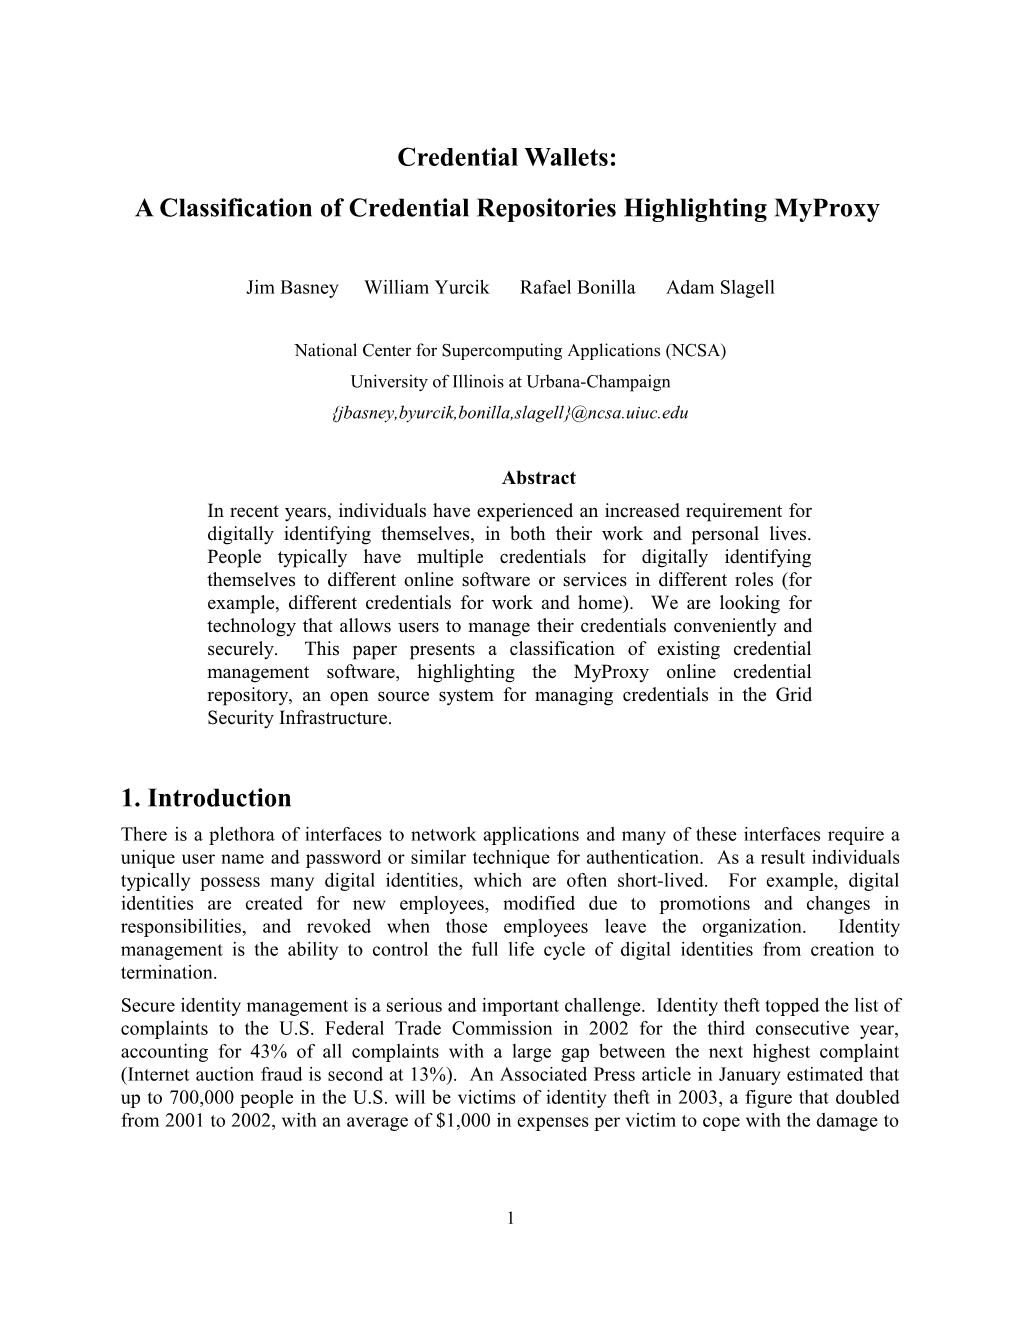 The Credential Wallet: a Classification of Credential Repositories Highlighting Myproxy